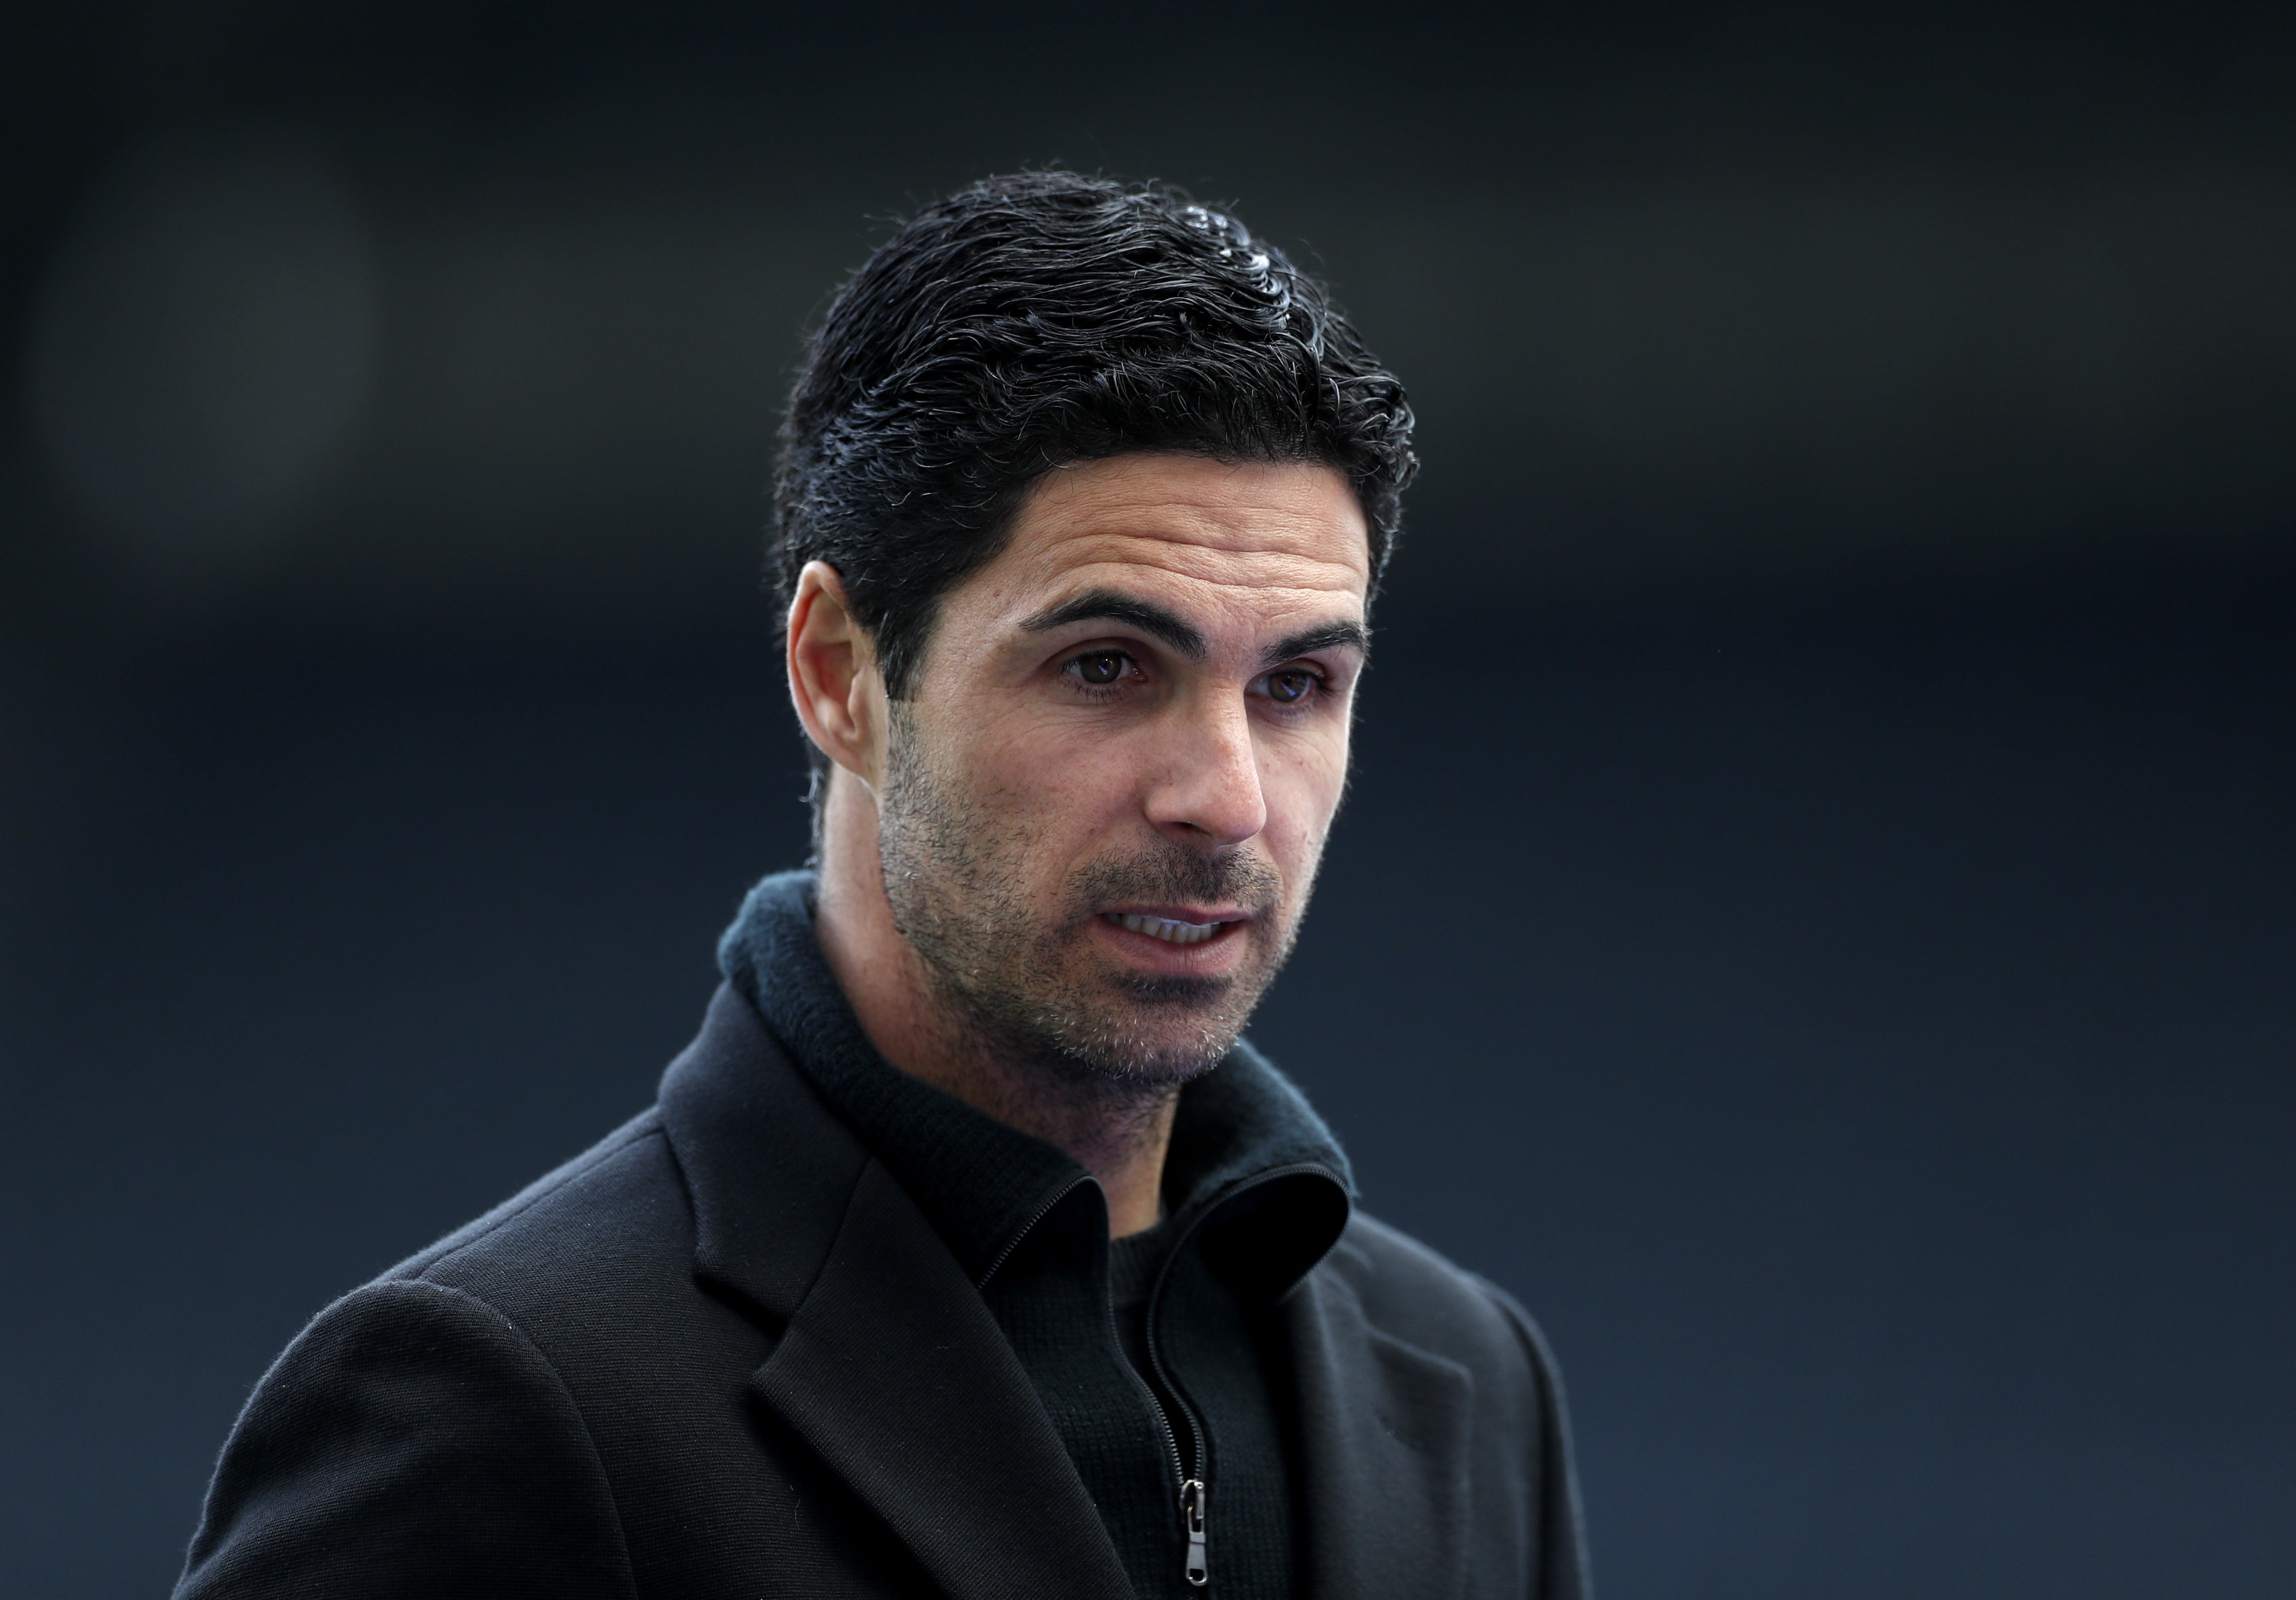 Mikel Arteta had an opening weekend to forget